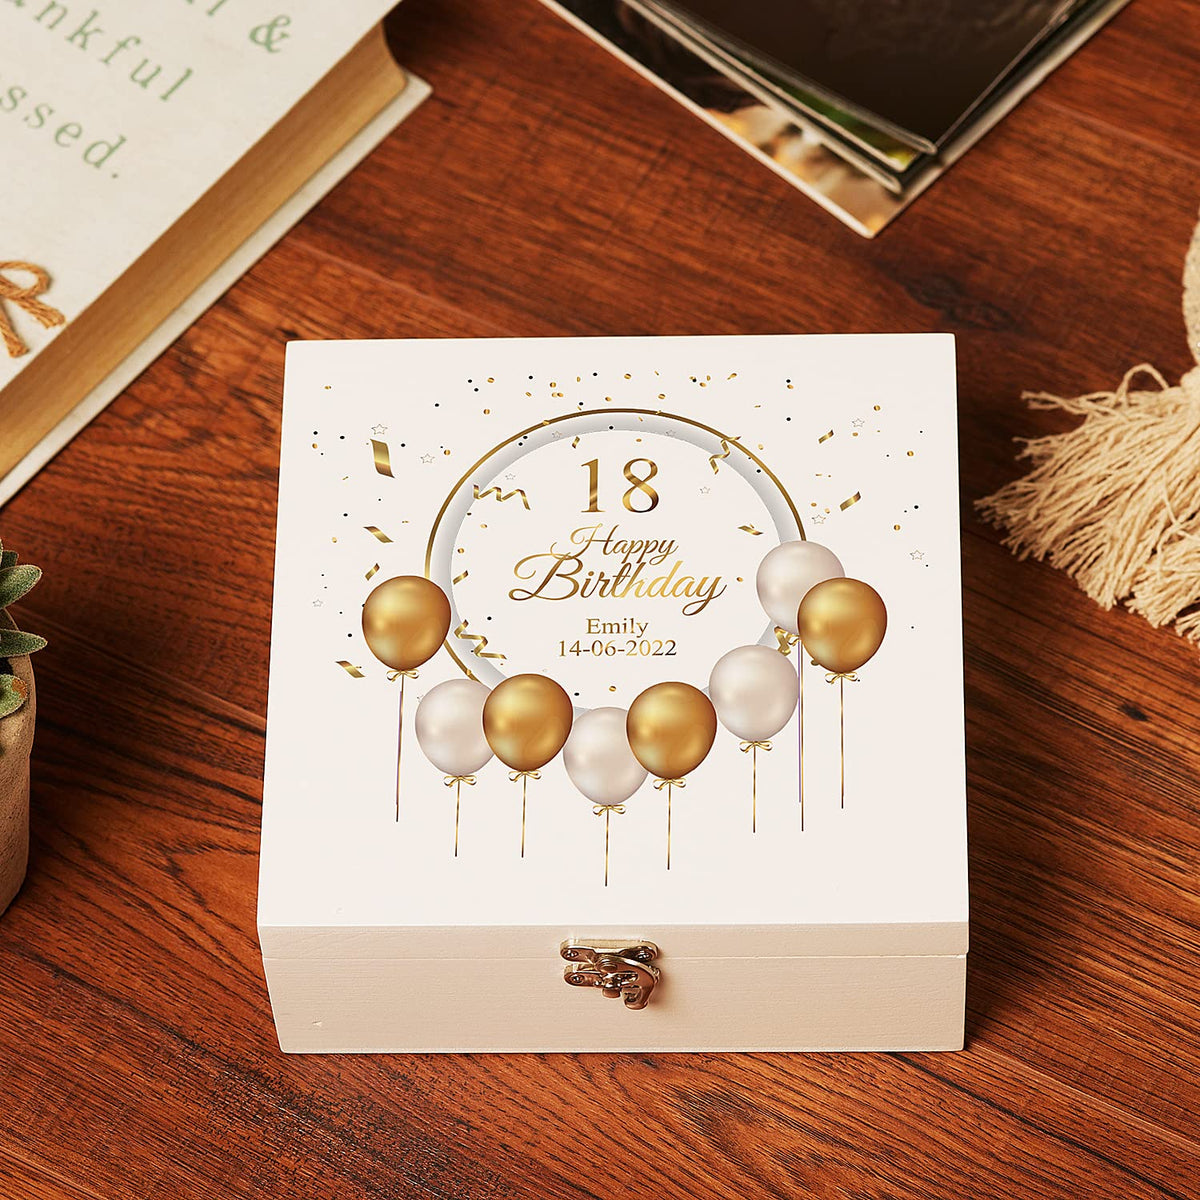 ukgiftstoreonline Personalised 18th Birthday Wooden Box Gift With Golden Balloons